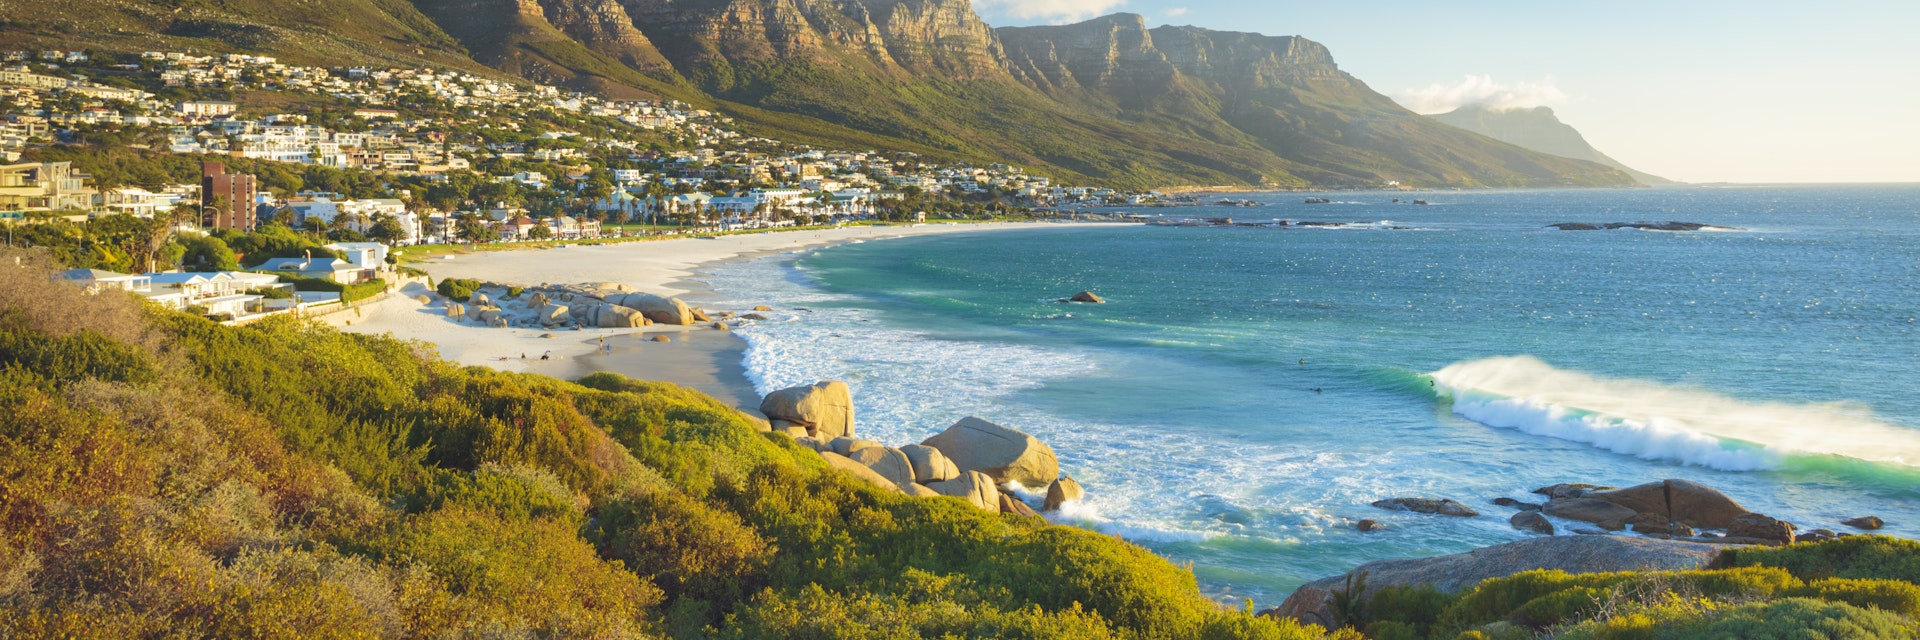 Mejeriprodukter angreb hans Cape Town travel - Lonely Planet | South Africa, Africa